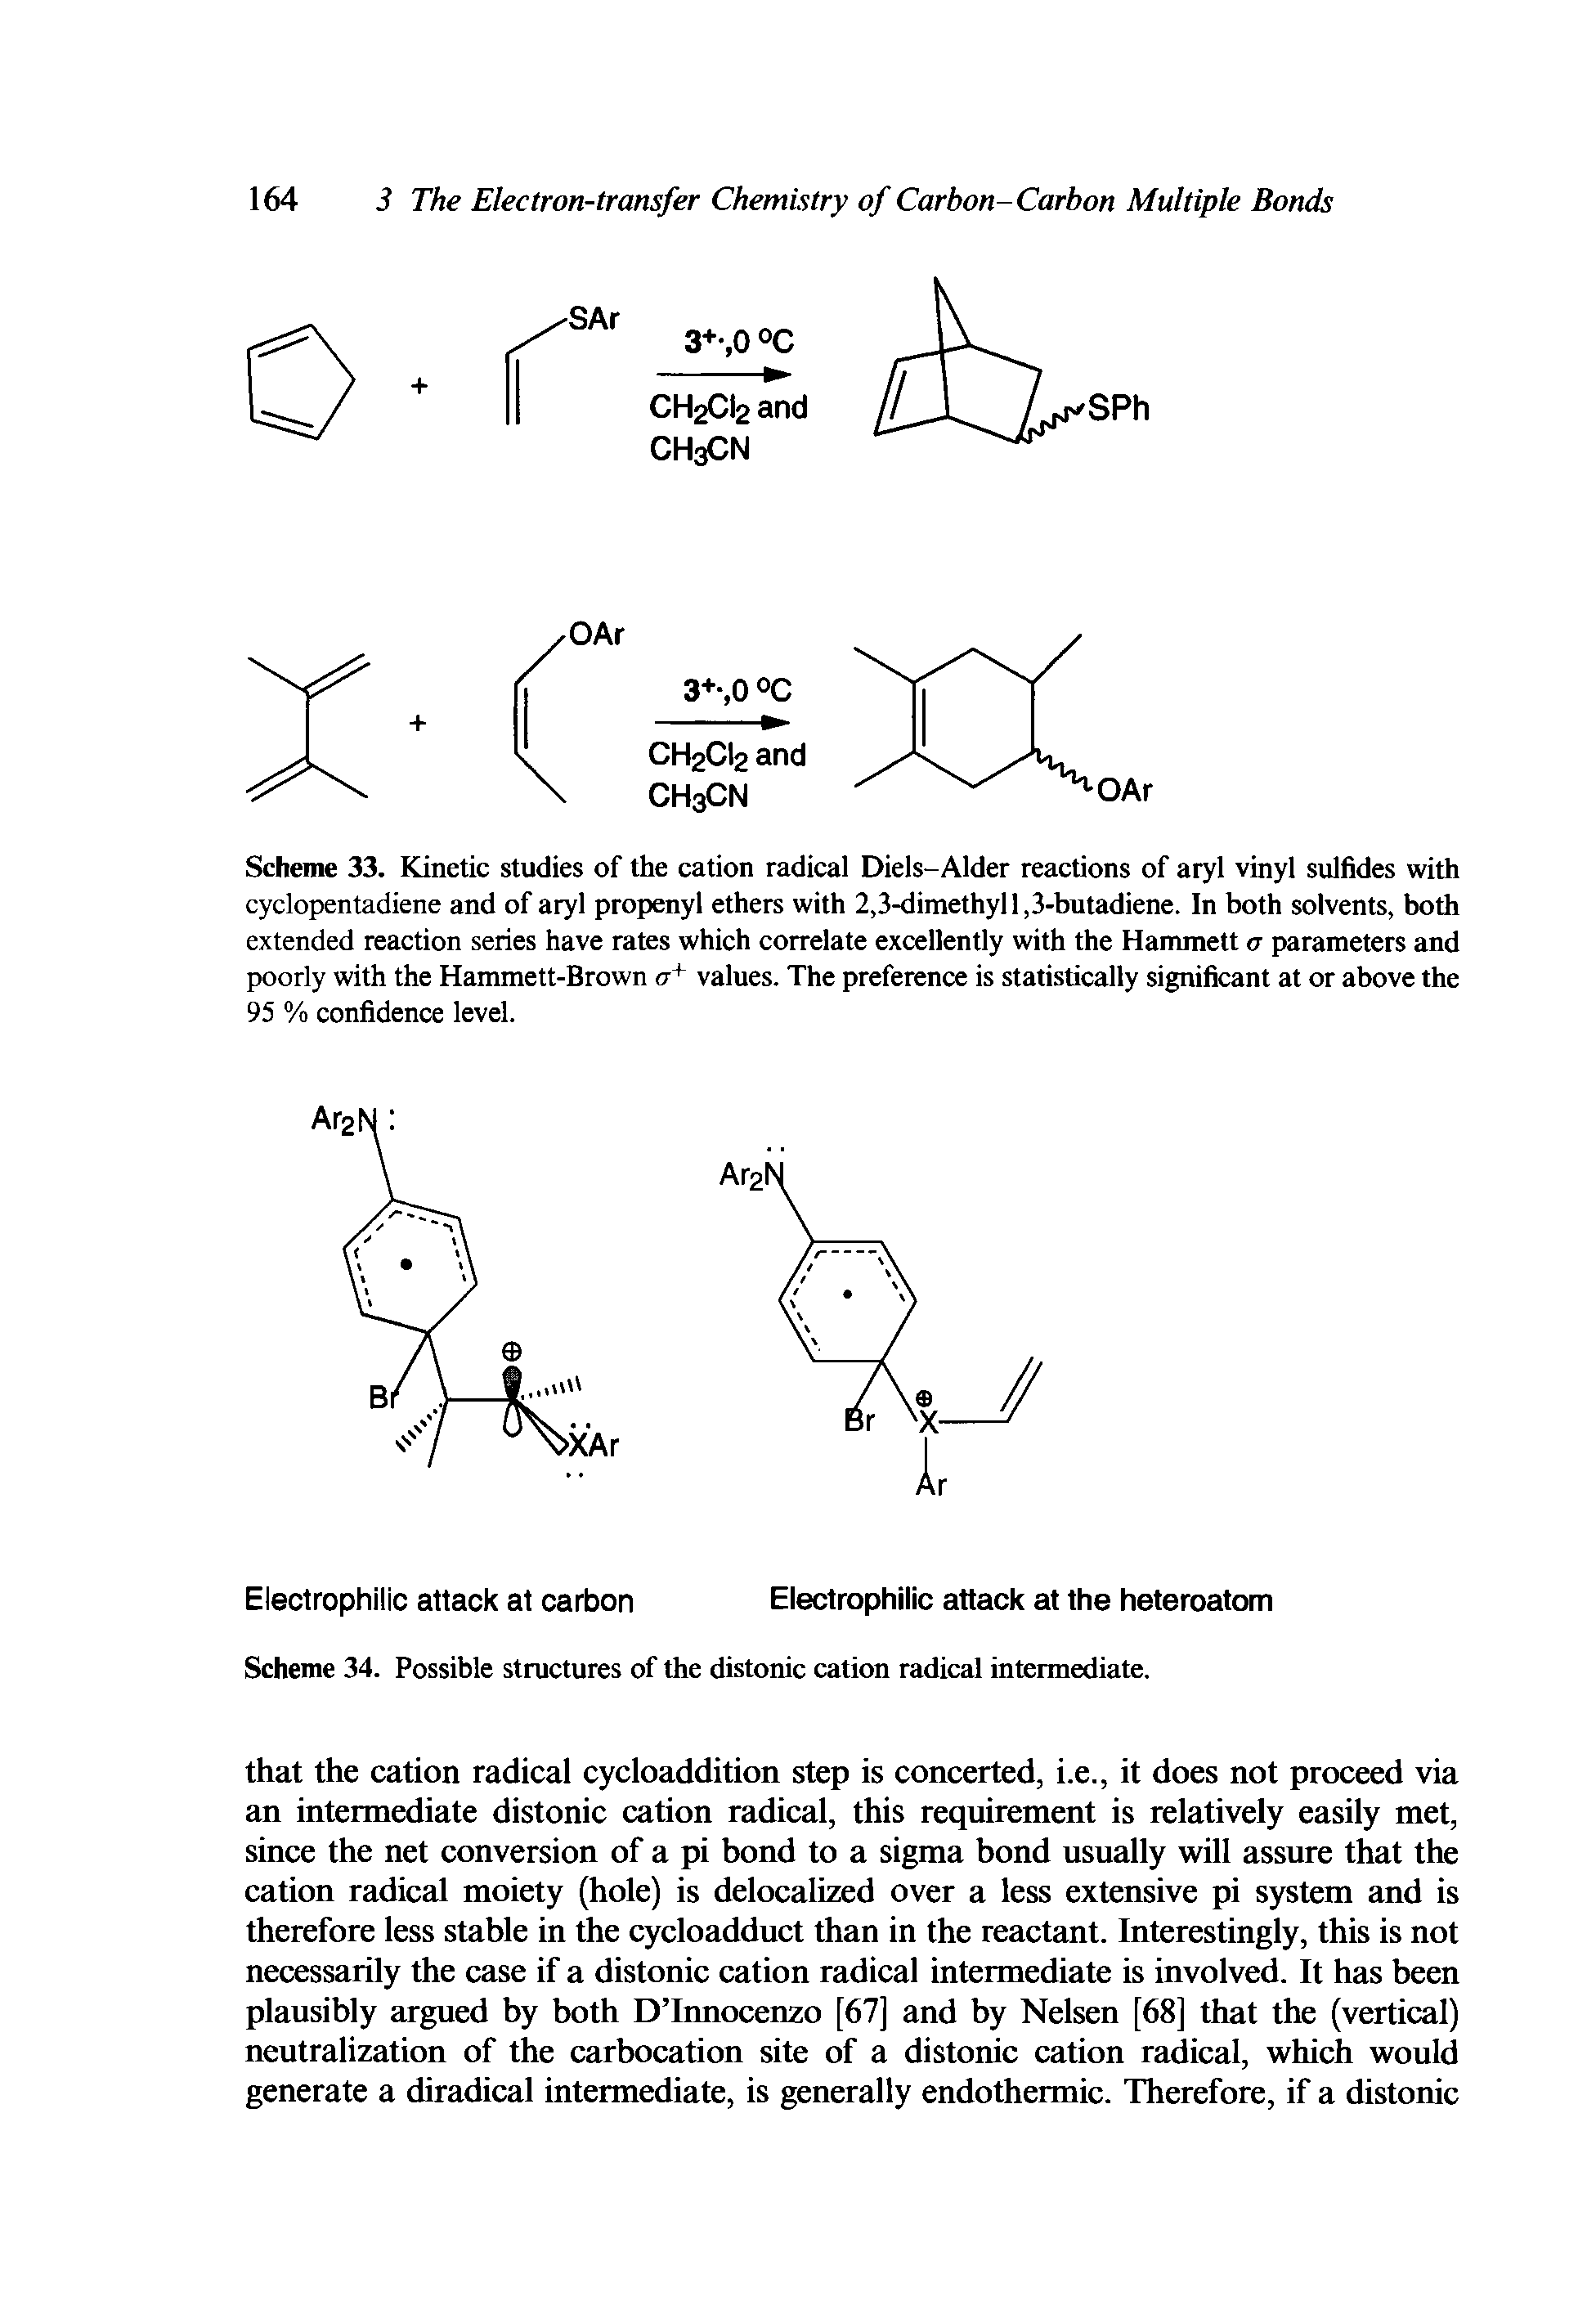 Scheme 33. Kinetic studies of the cation radical Diels-Alder reactions of aryl vinyl sulfides with cyclopentadiene and of aryl propenyl ethers with 2,3-dimethyl 1,3-butadiene. In both solvents, both extended reaction series have rates which correlate excellently with the Hammett a parameters and poorly with the Hammett-Brown o-+ values. The preference is statistically significant at or above the 95 % confidence level.